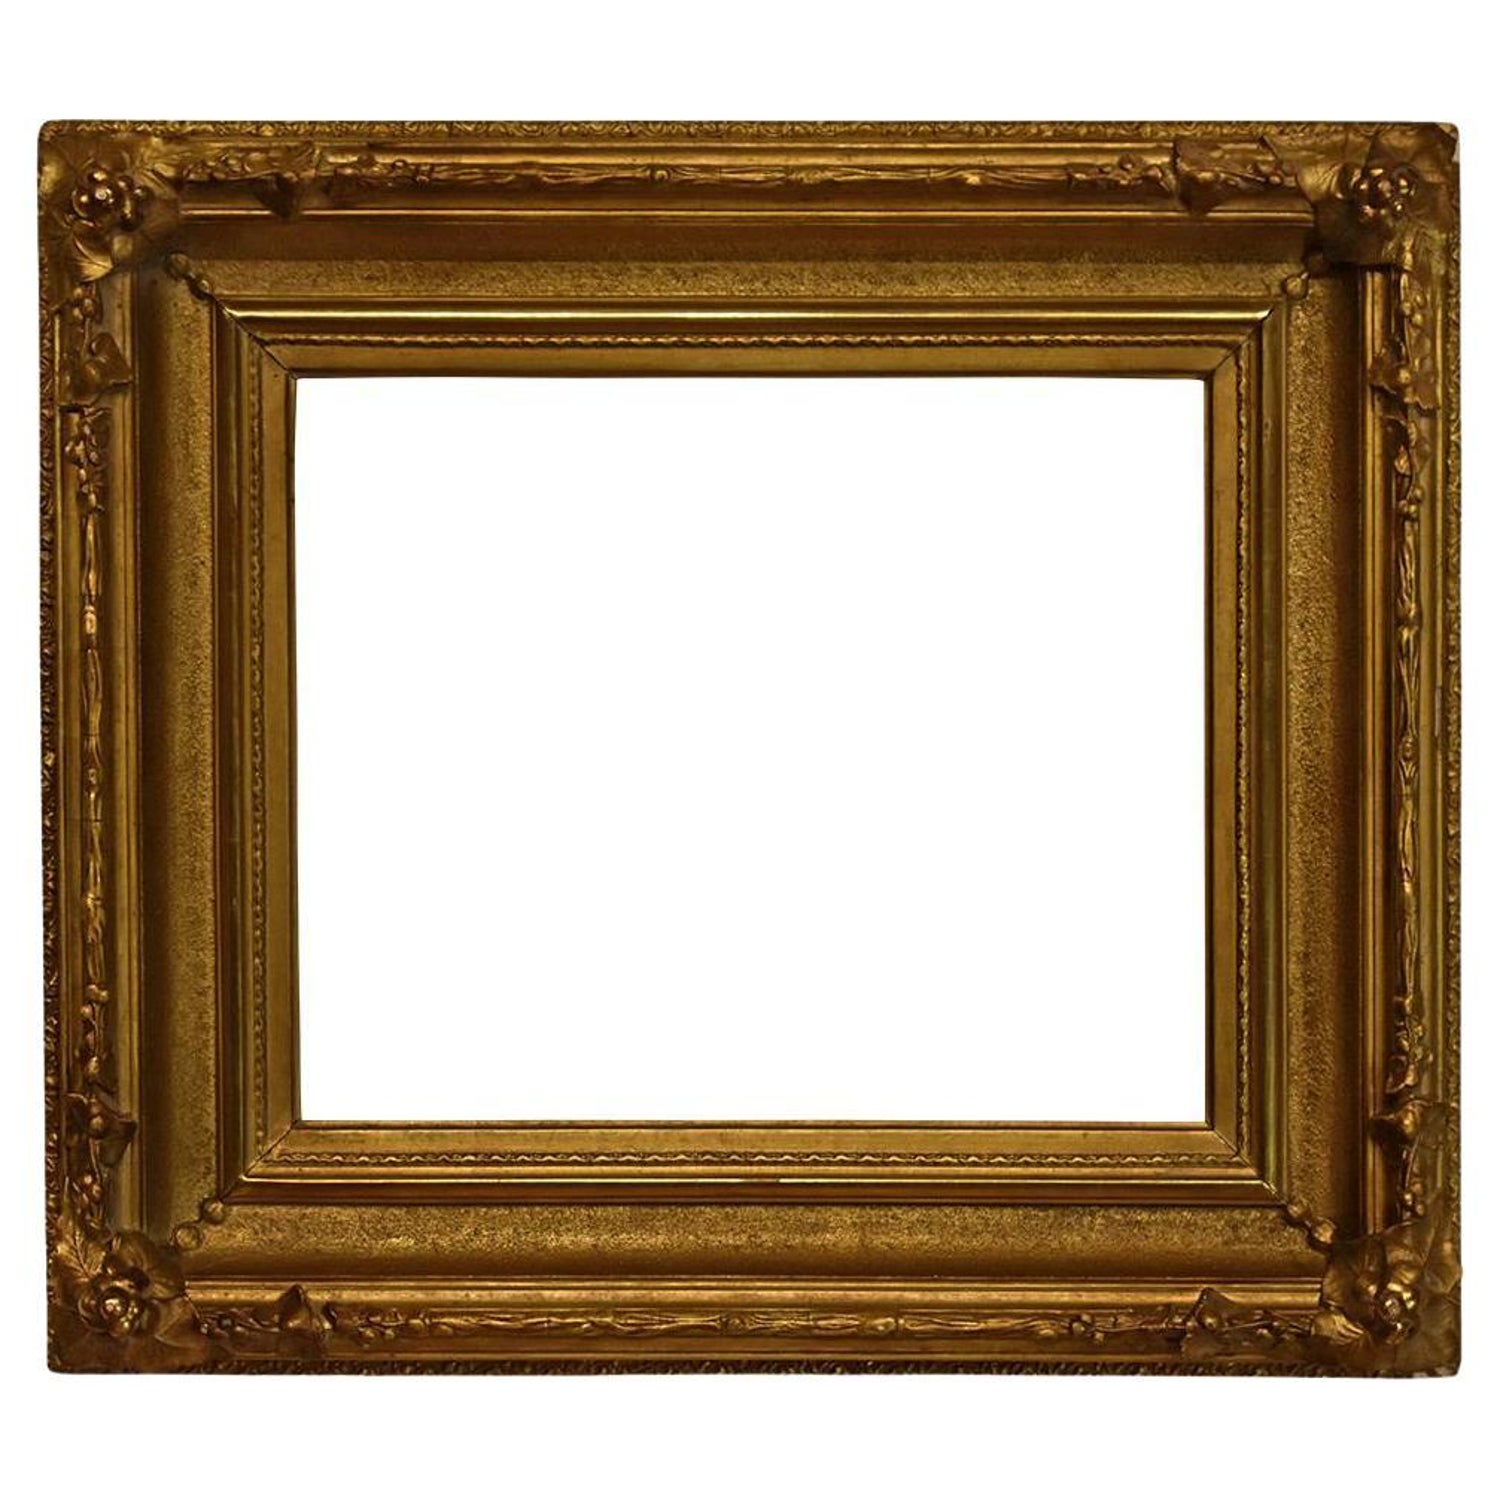 https://a.1stdibscdn.com/19th-century-hudson-river-gold-10x13-picture-frame-for-sale/f_59832/f_262507221637700256620/f_26250722_1637700256899_bg_processed.jpg?width=1500